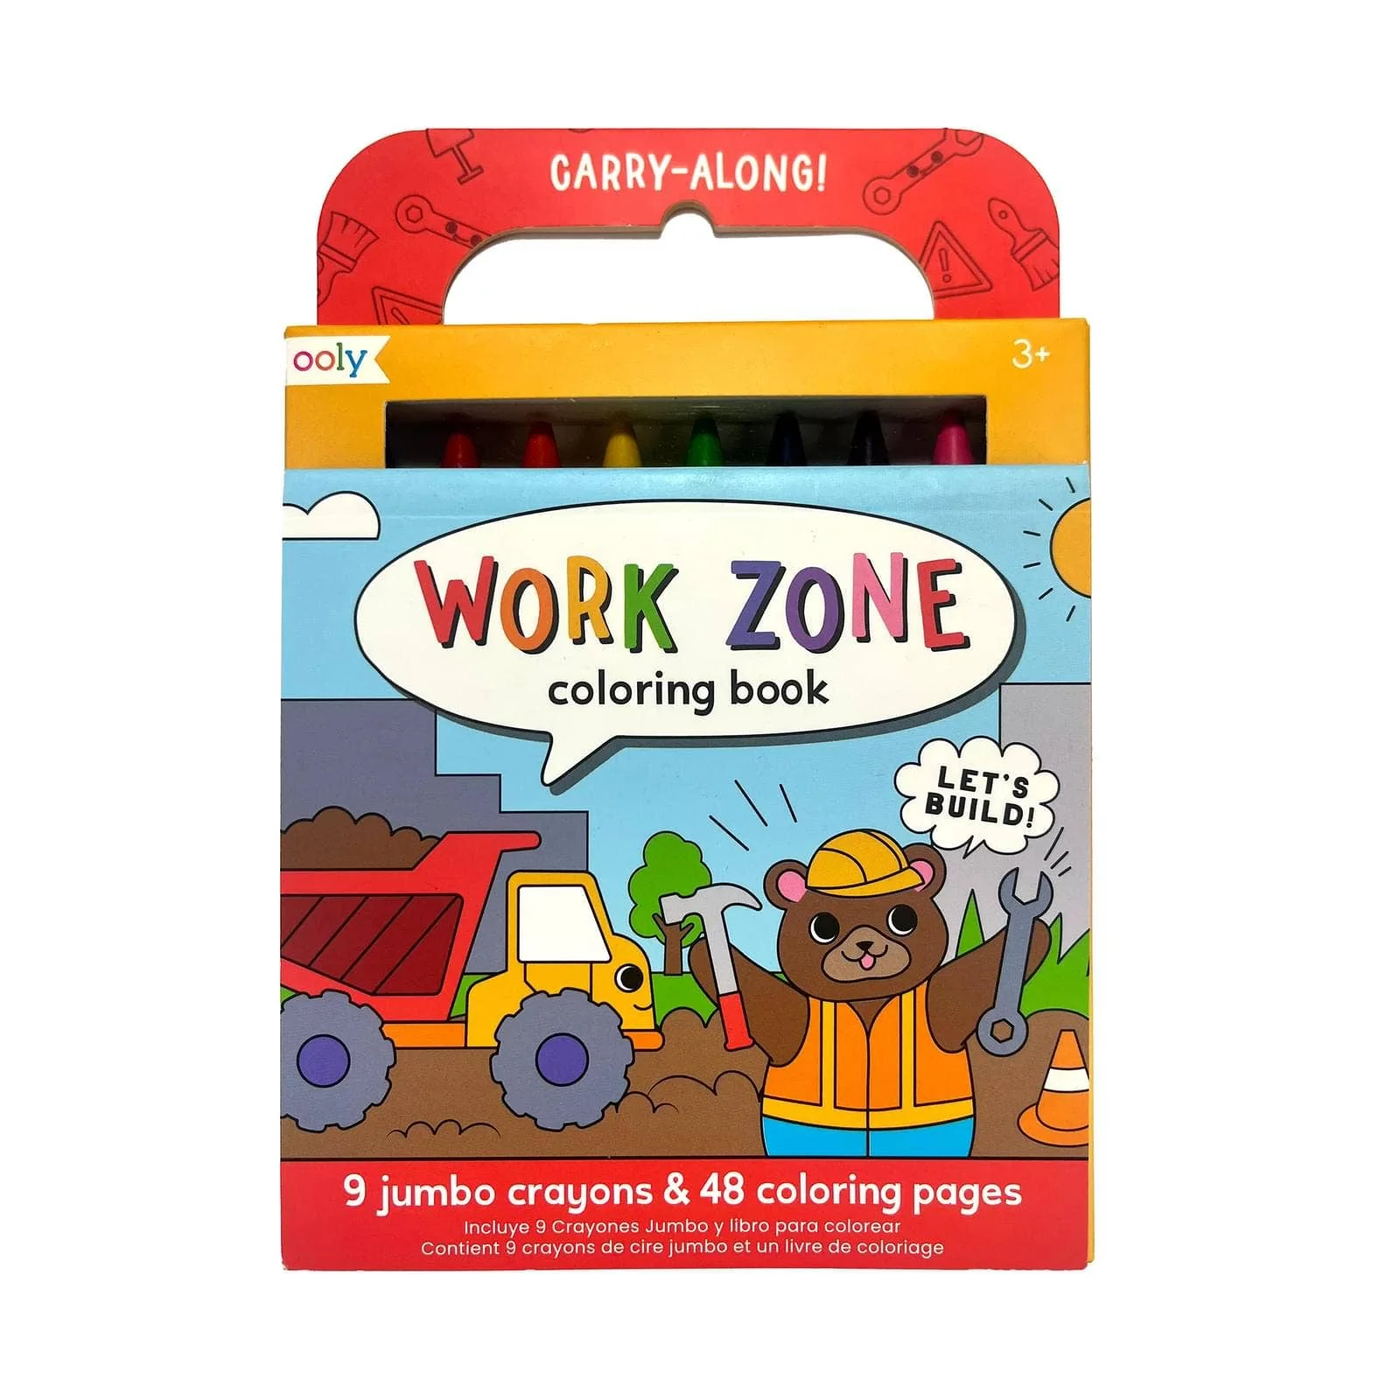 Work Zone Coloring Book